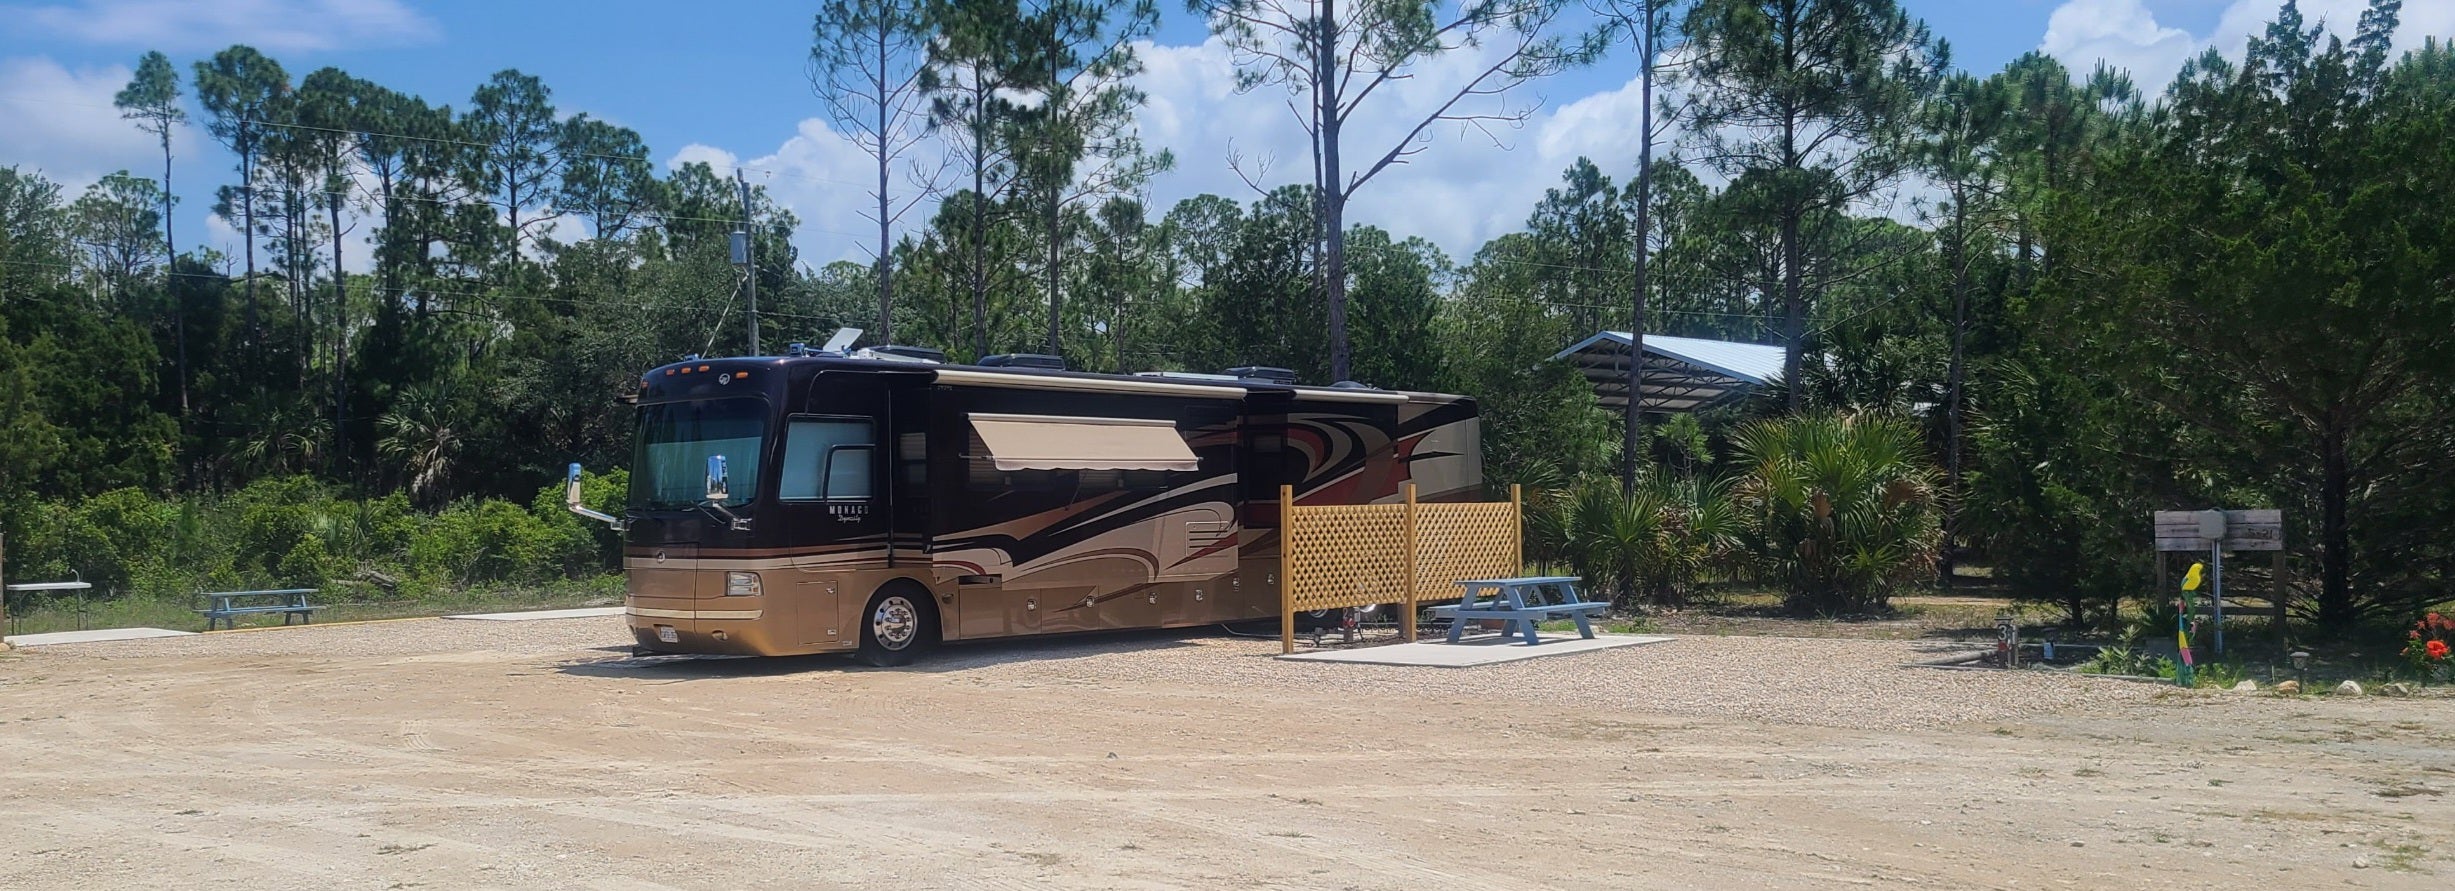 Camper submitted image from Anchors Out Rv - 2